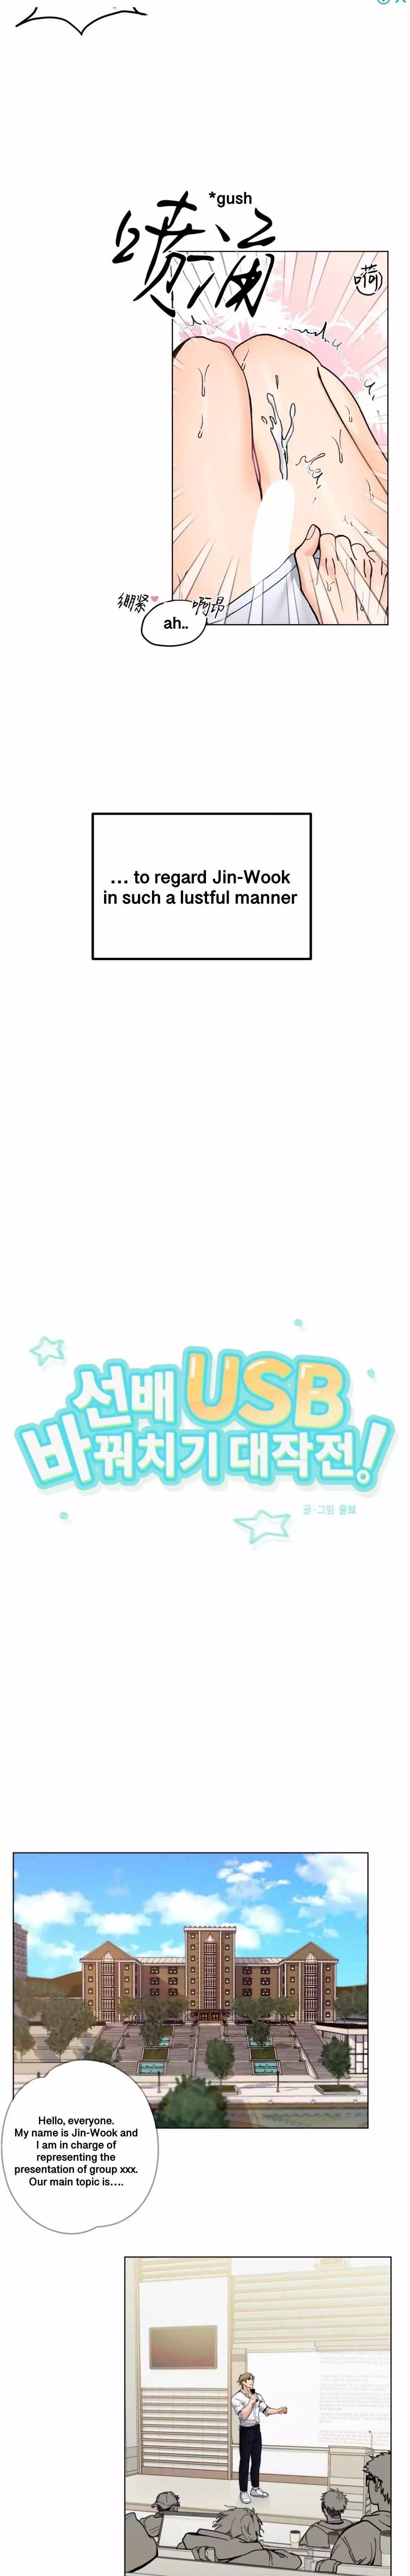 Seonbae USB Swapping Plan! - Capítulo 01 - Coven Scan